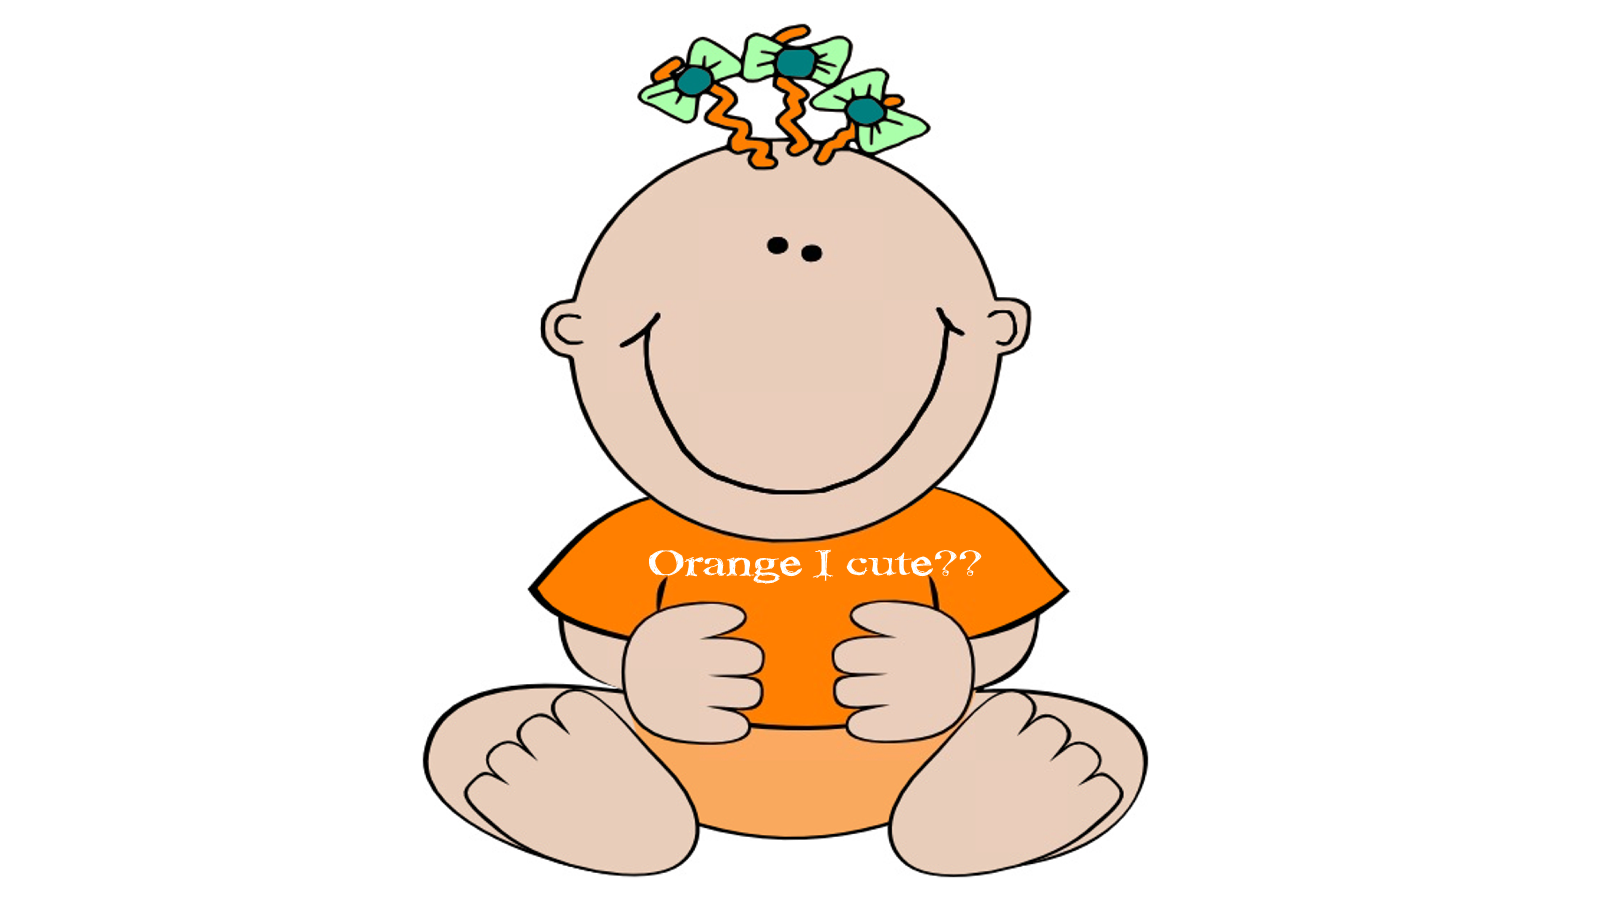 Baby Orange Cute | Free Images at Clker.com - vector clip ...